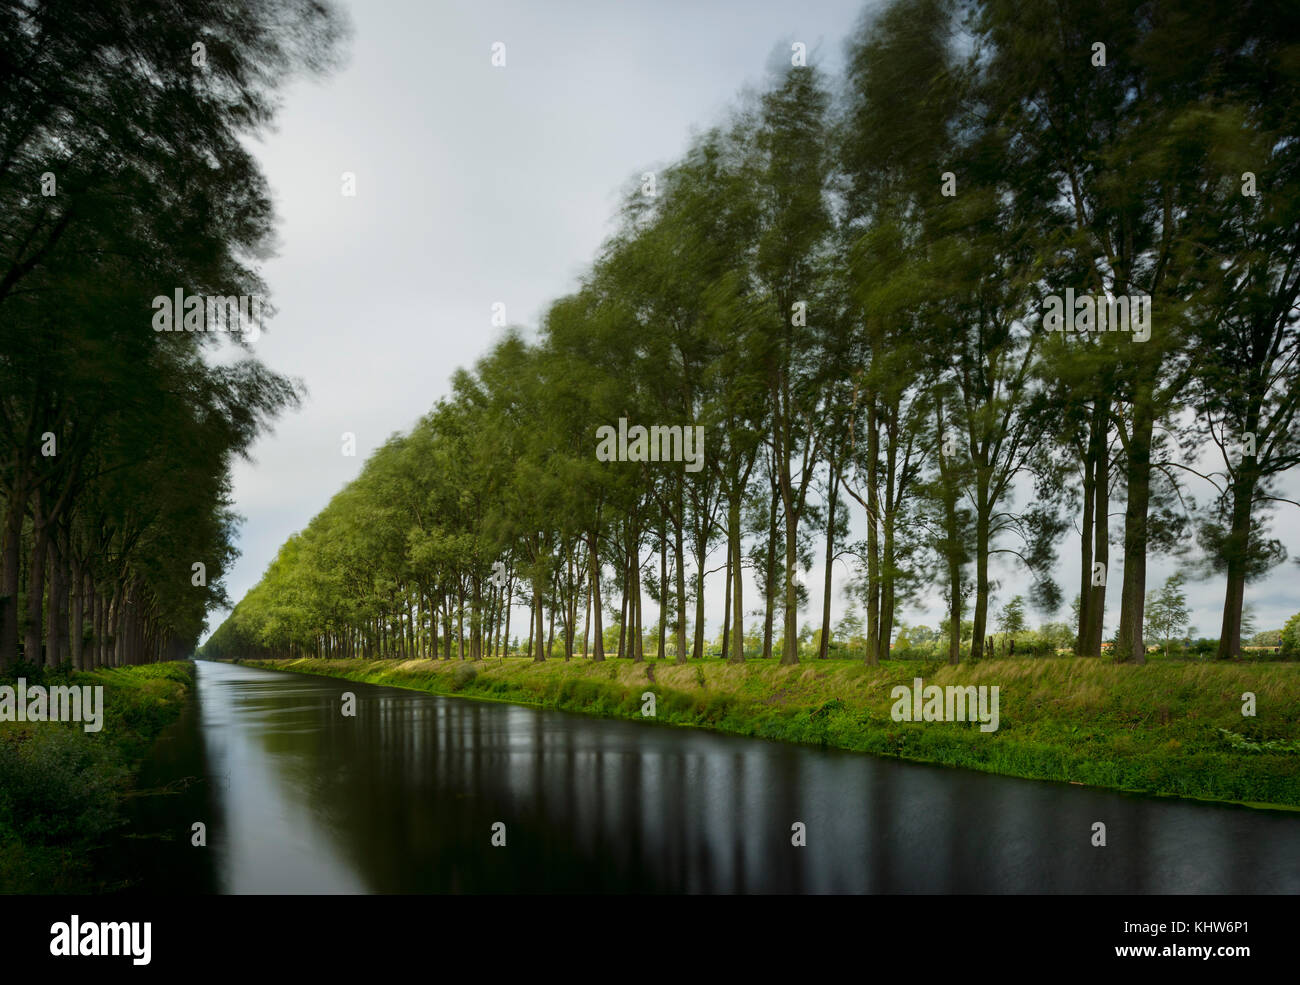 Trees on a stormy day, Leopold Canal,  Damme, West Flanders, Belgium Stock Photo